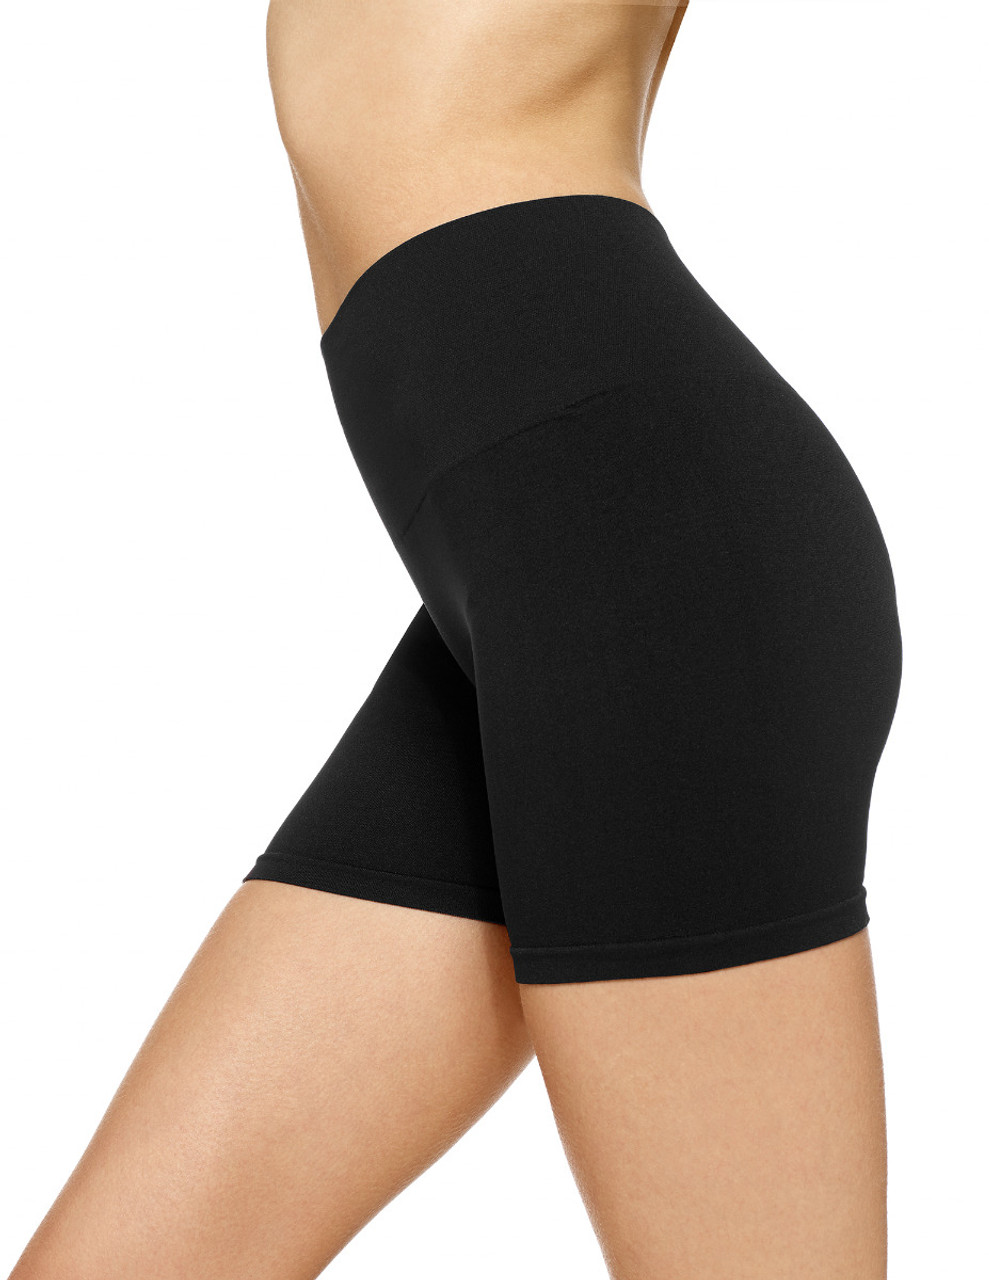 Skinnygirl Smoothers & Shapers Seamless Slip Shorts Size M Black Biker  Shorts - DR Trouble